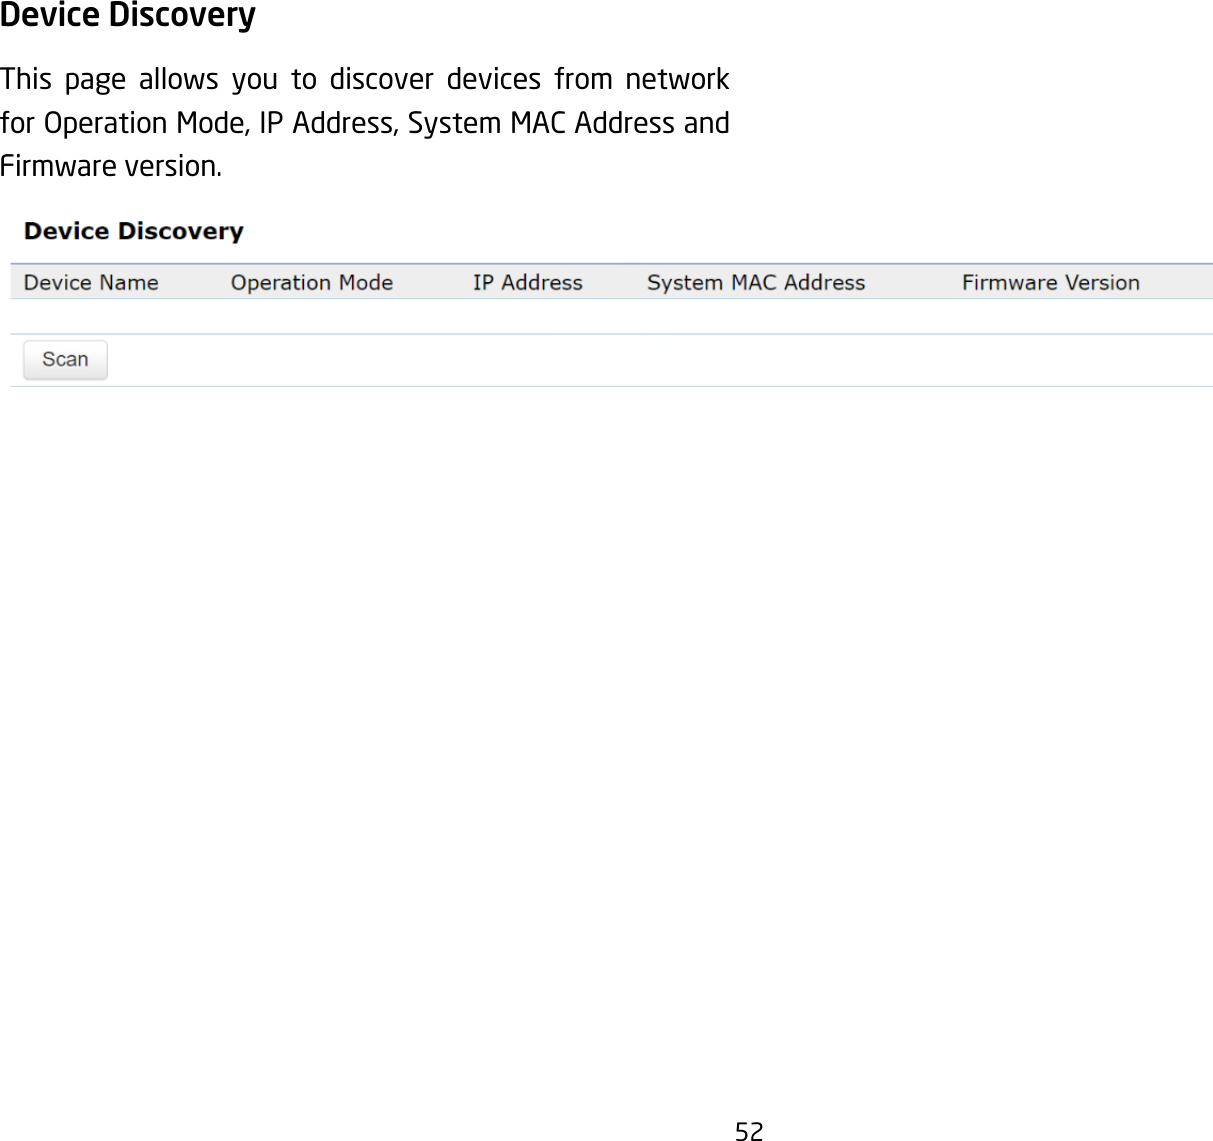 52Device Discovery This page allows you to discover devices from network for Operation Mode, IP Address, System MAC Address and Firmware version.